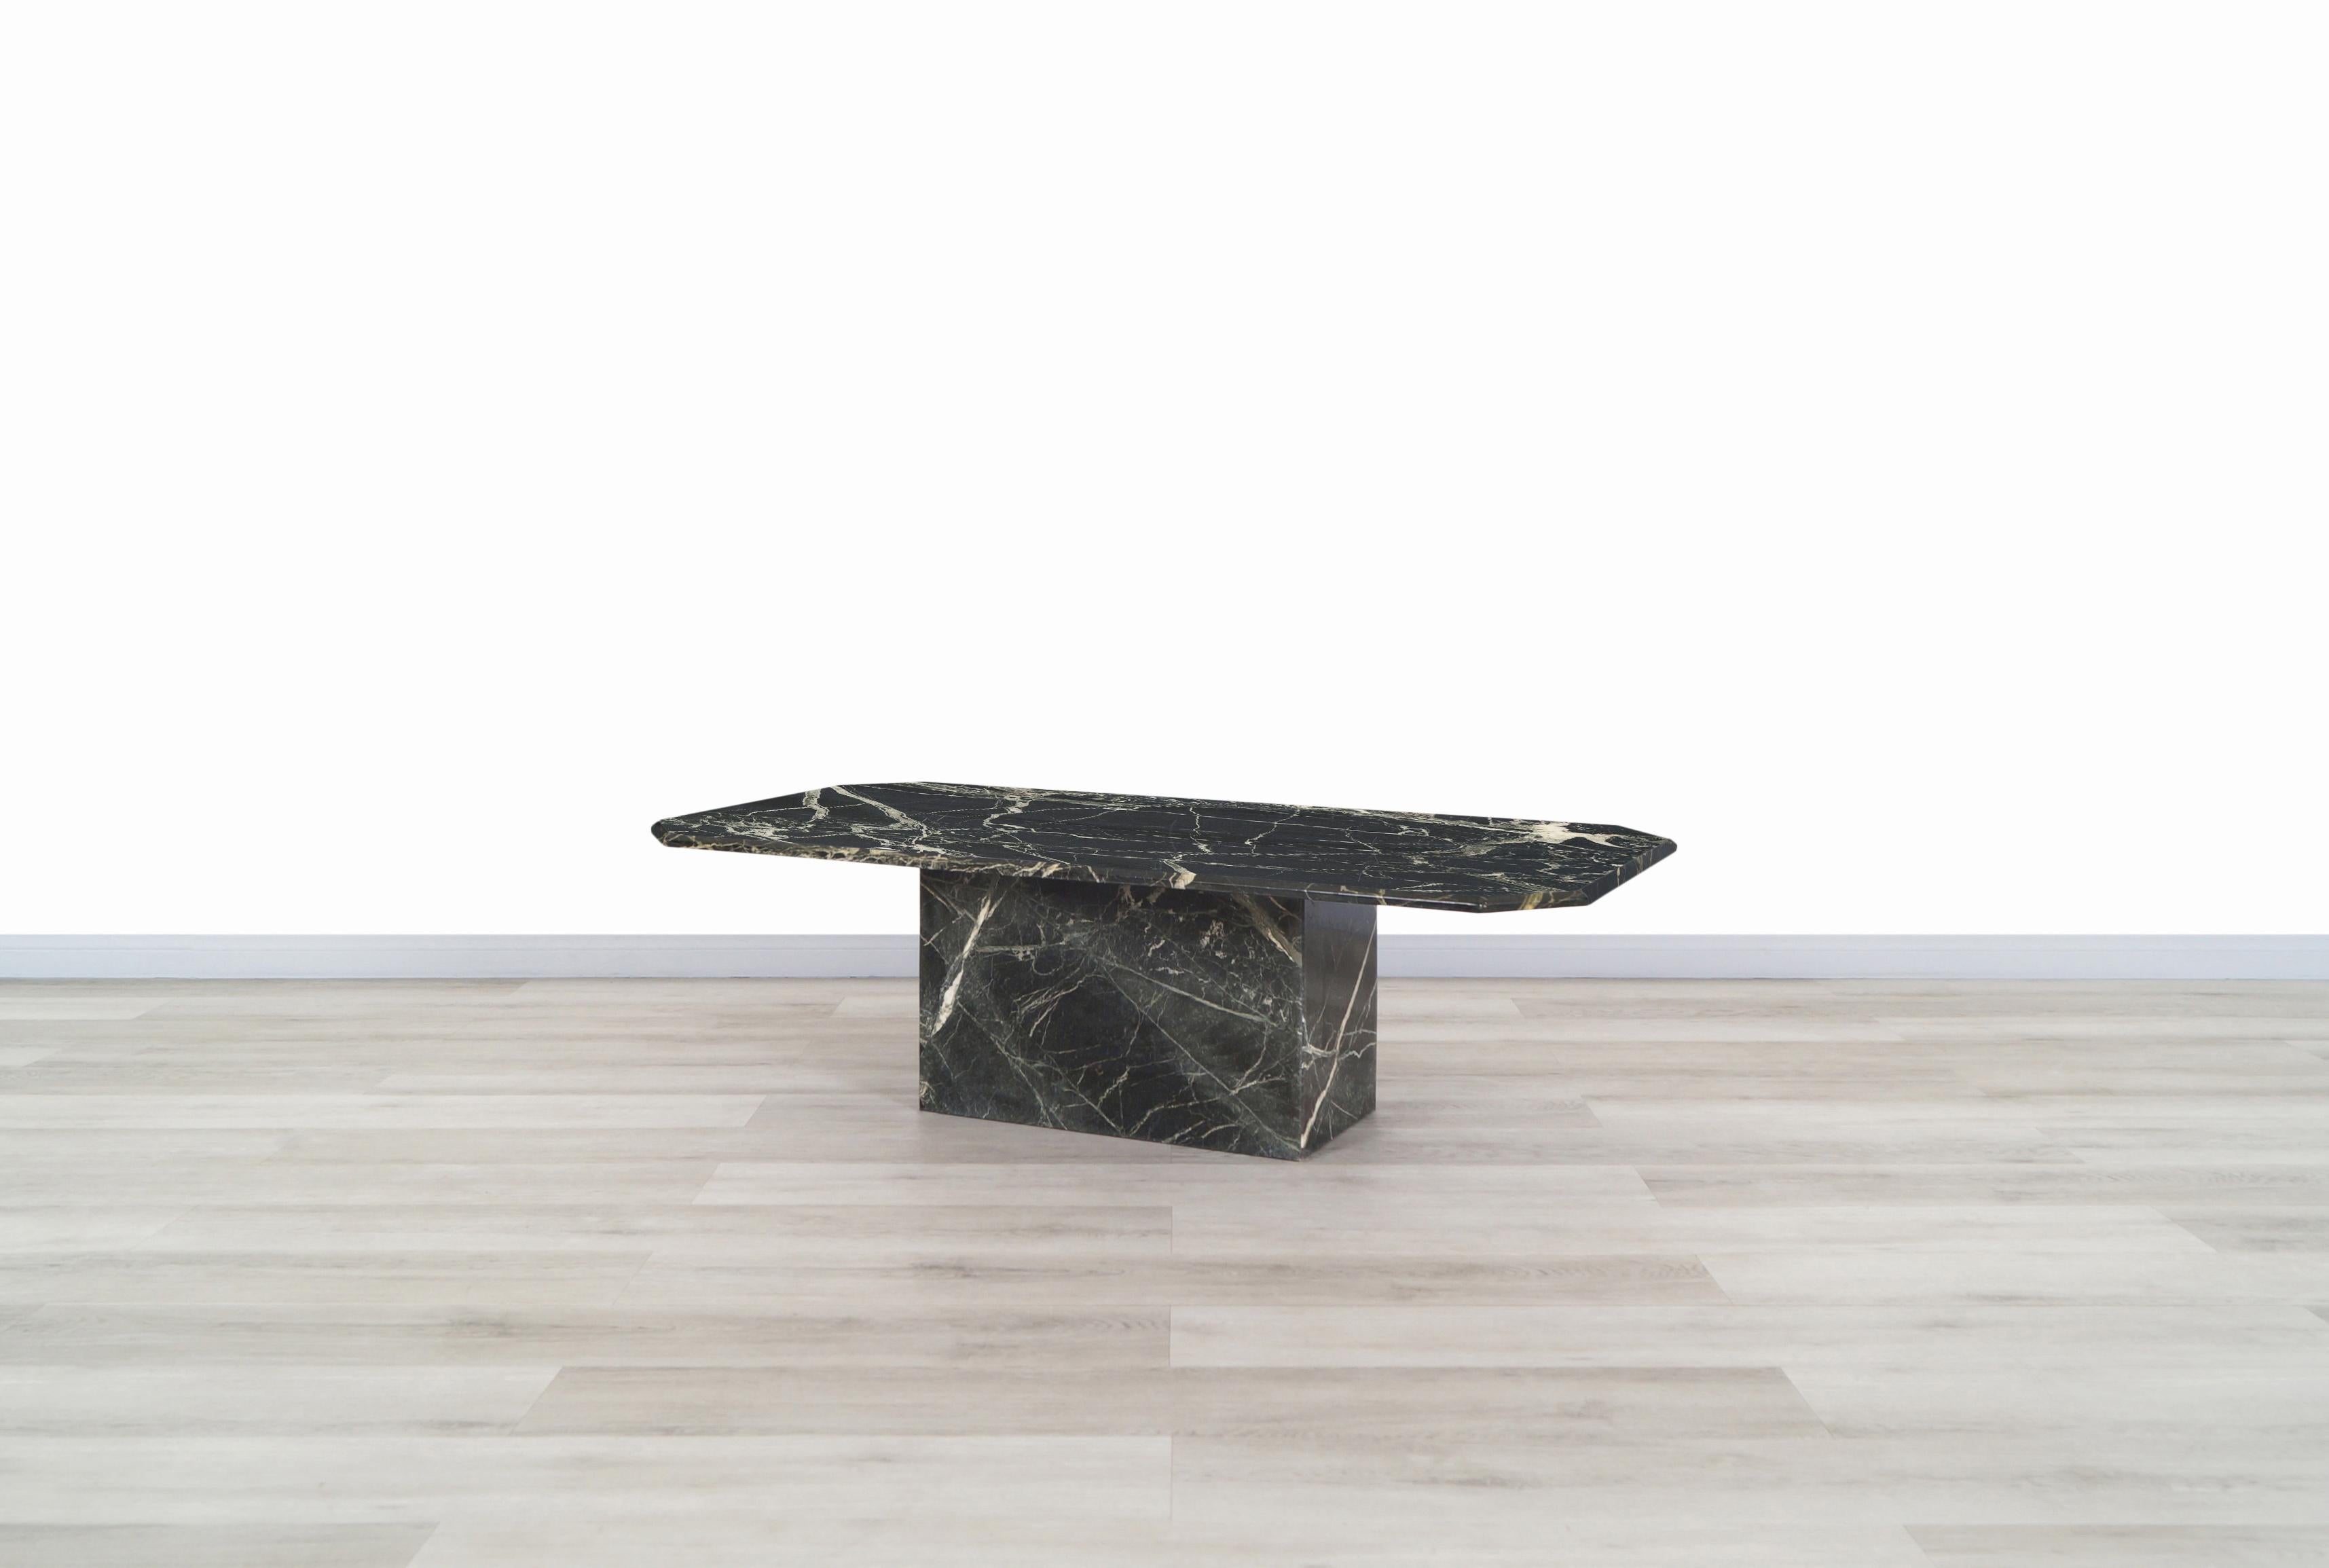 A stunning vintage marble coffee table designed and manufactured in Italy, circa 1980s. This modernist table features a gorgeous verde empress marble that sits over an extremely sturdy base. Simple and Minimalist style along the rich veining and